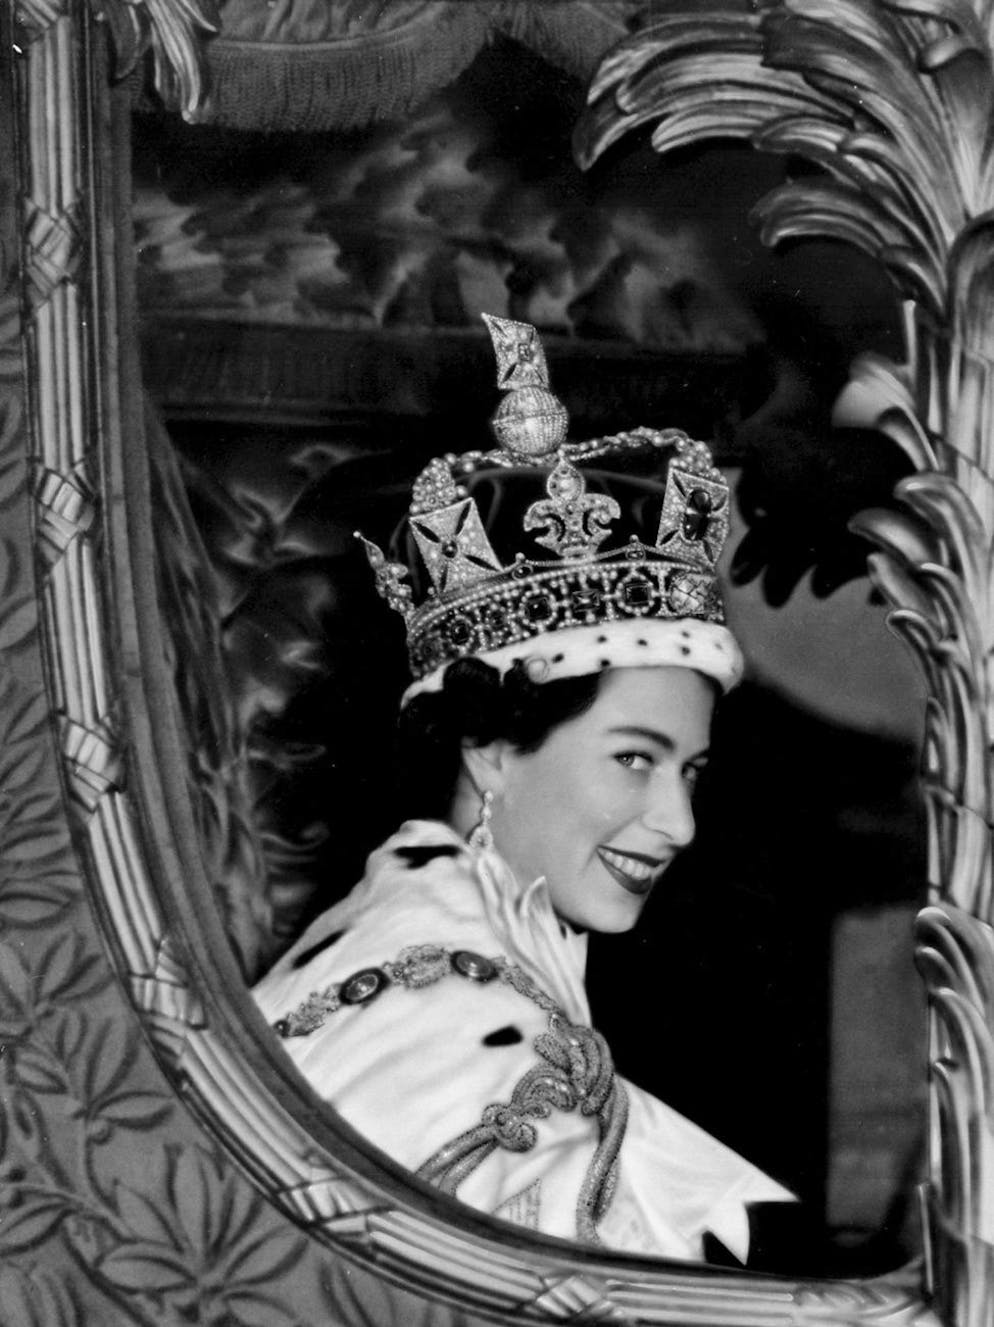 Queen Elizabeth II coronation on June 2, 1953. The Queen Elizabeth II gives a wide smile for the crowds as she leaves Westminster Abbey in London after her coronation. (KEYSTONE/EPA/PAl/Str) === ===